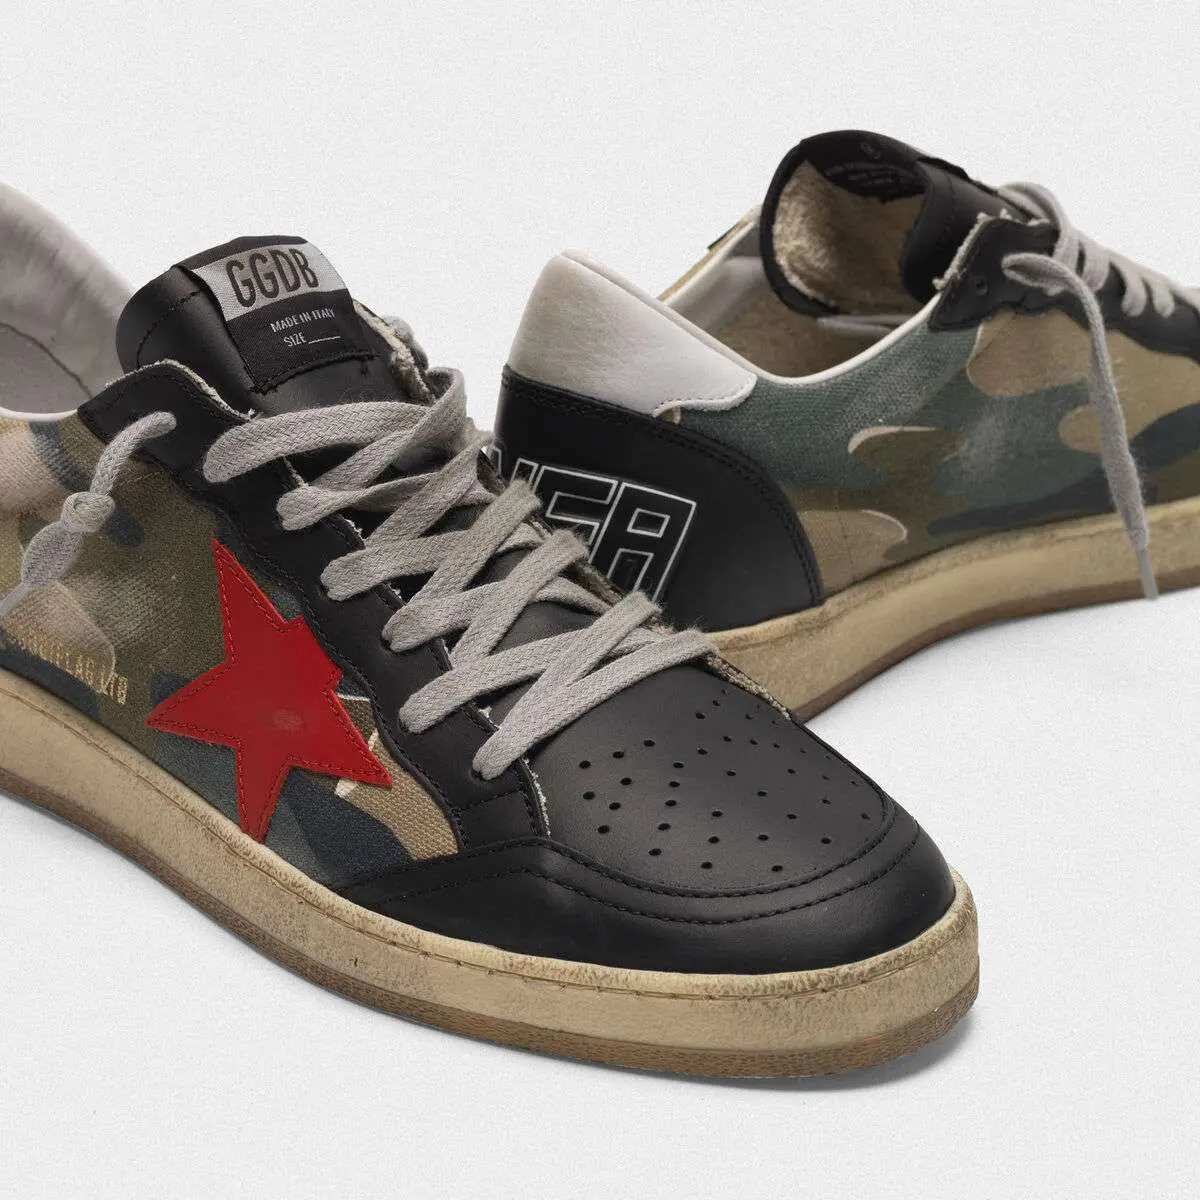 Ball Star Ball Star sneakers with camouflage print